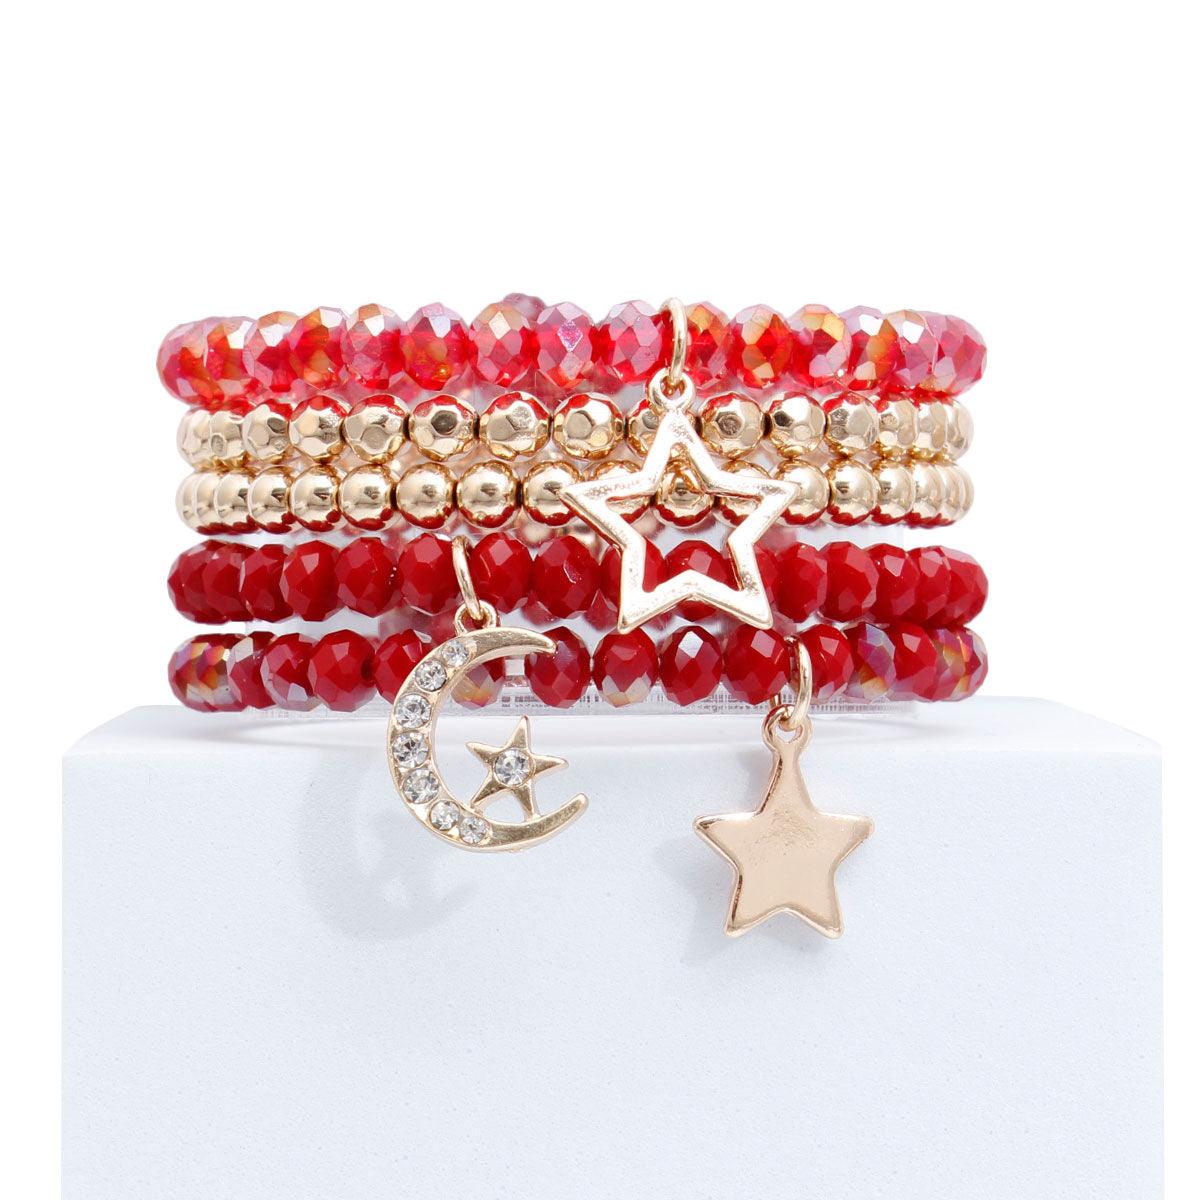 Red Glass and Gold Tone Star Charms Bracelet Set